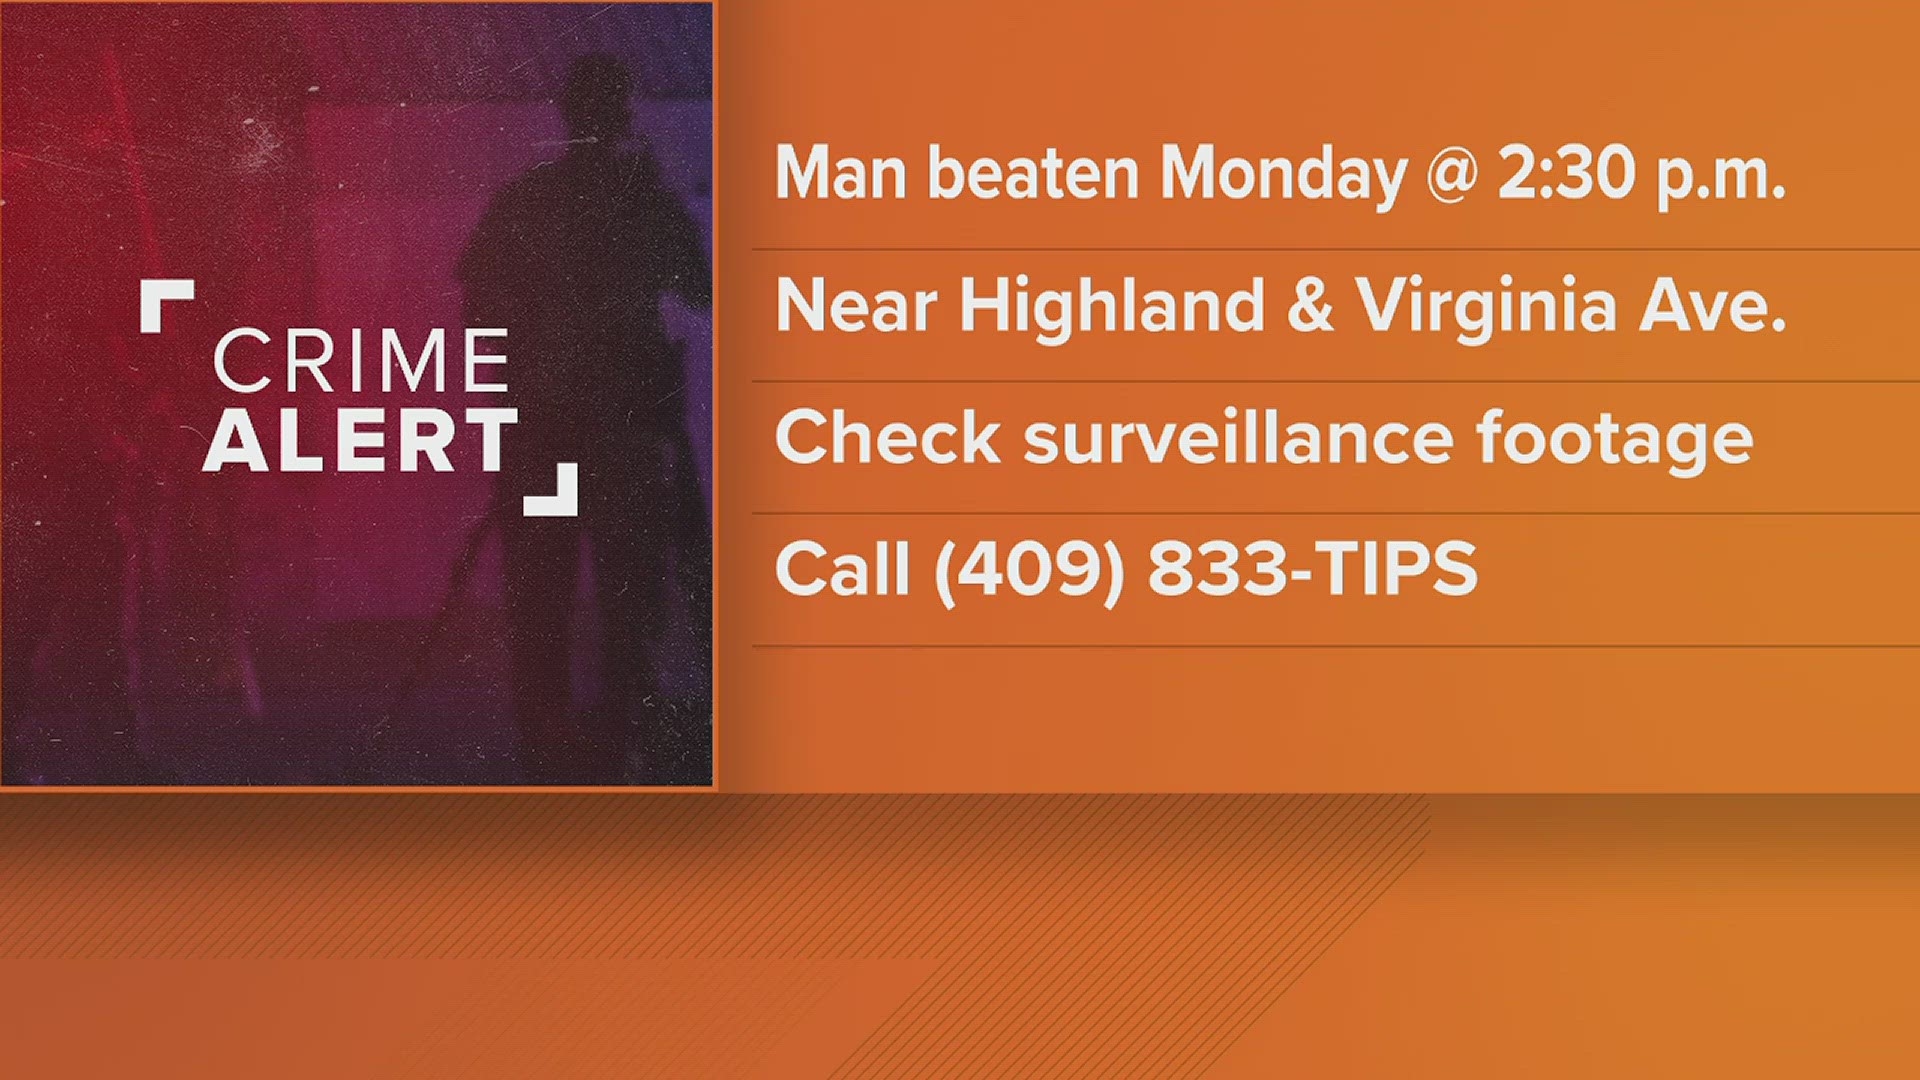 Beaumont Police investigating beating of man Monday afternoon